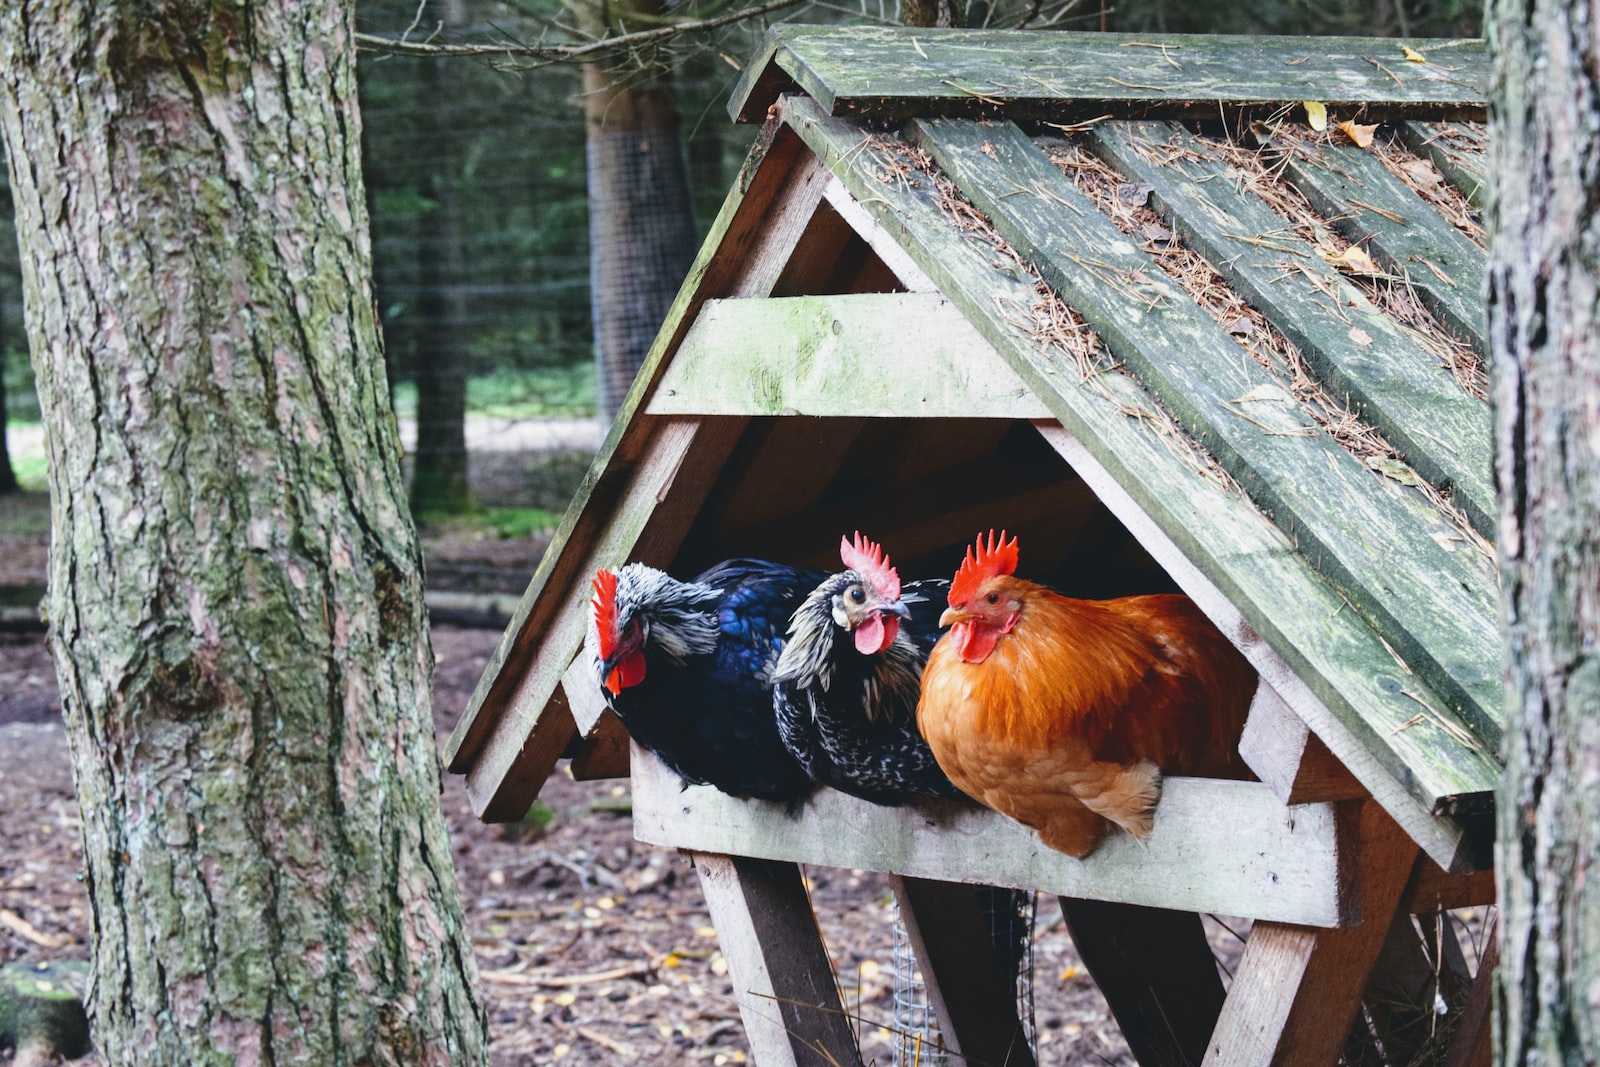 In this article, I'll discuss some of the most common mistakes to avoid when starting a chicken flock.